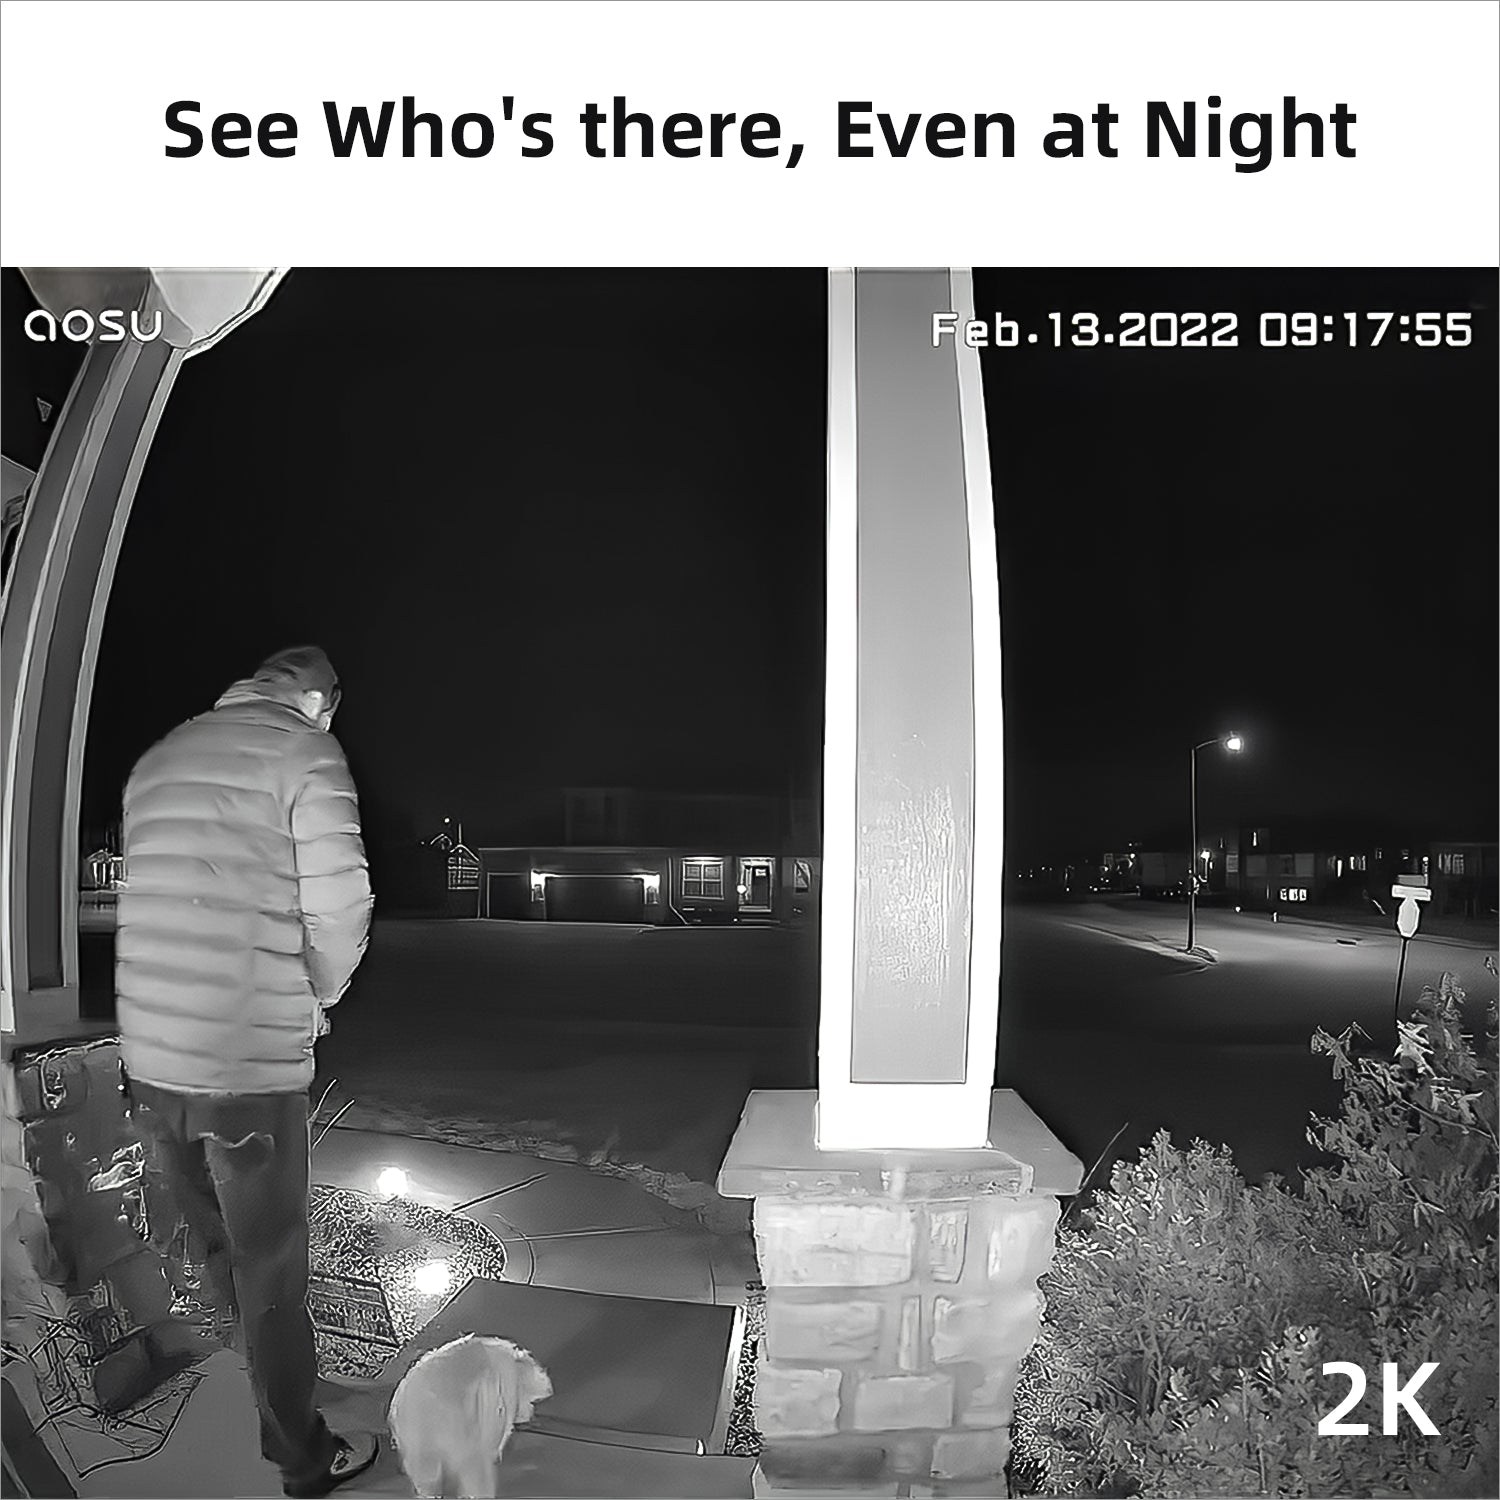 See Who's there, Even at Night